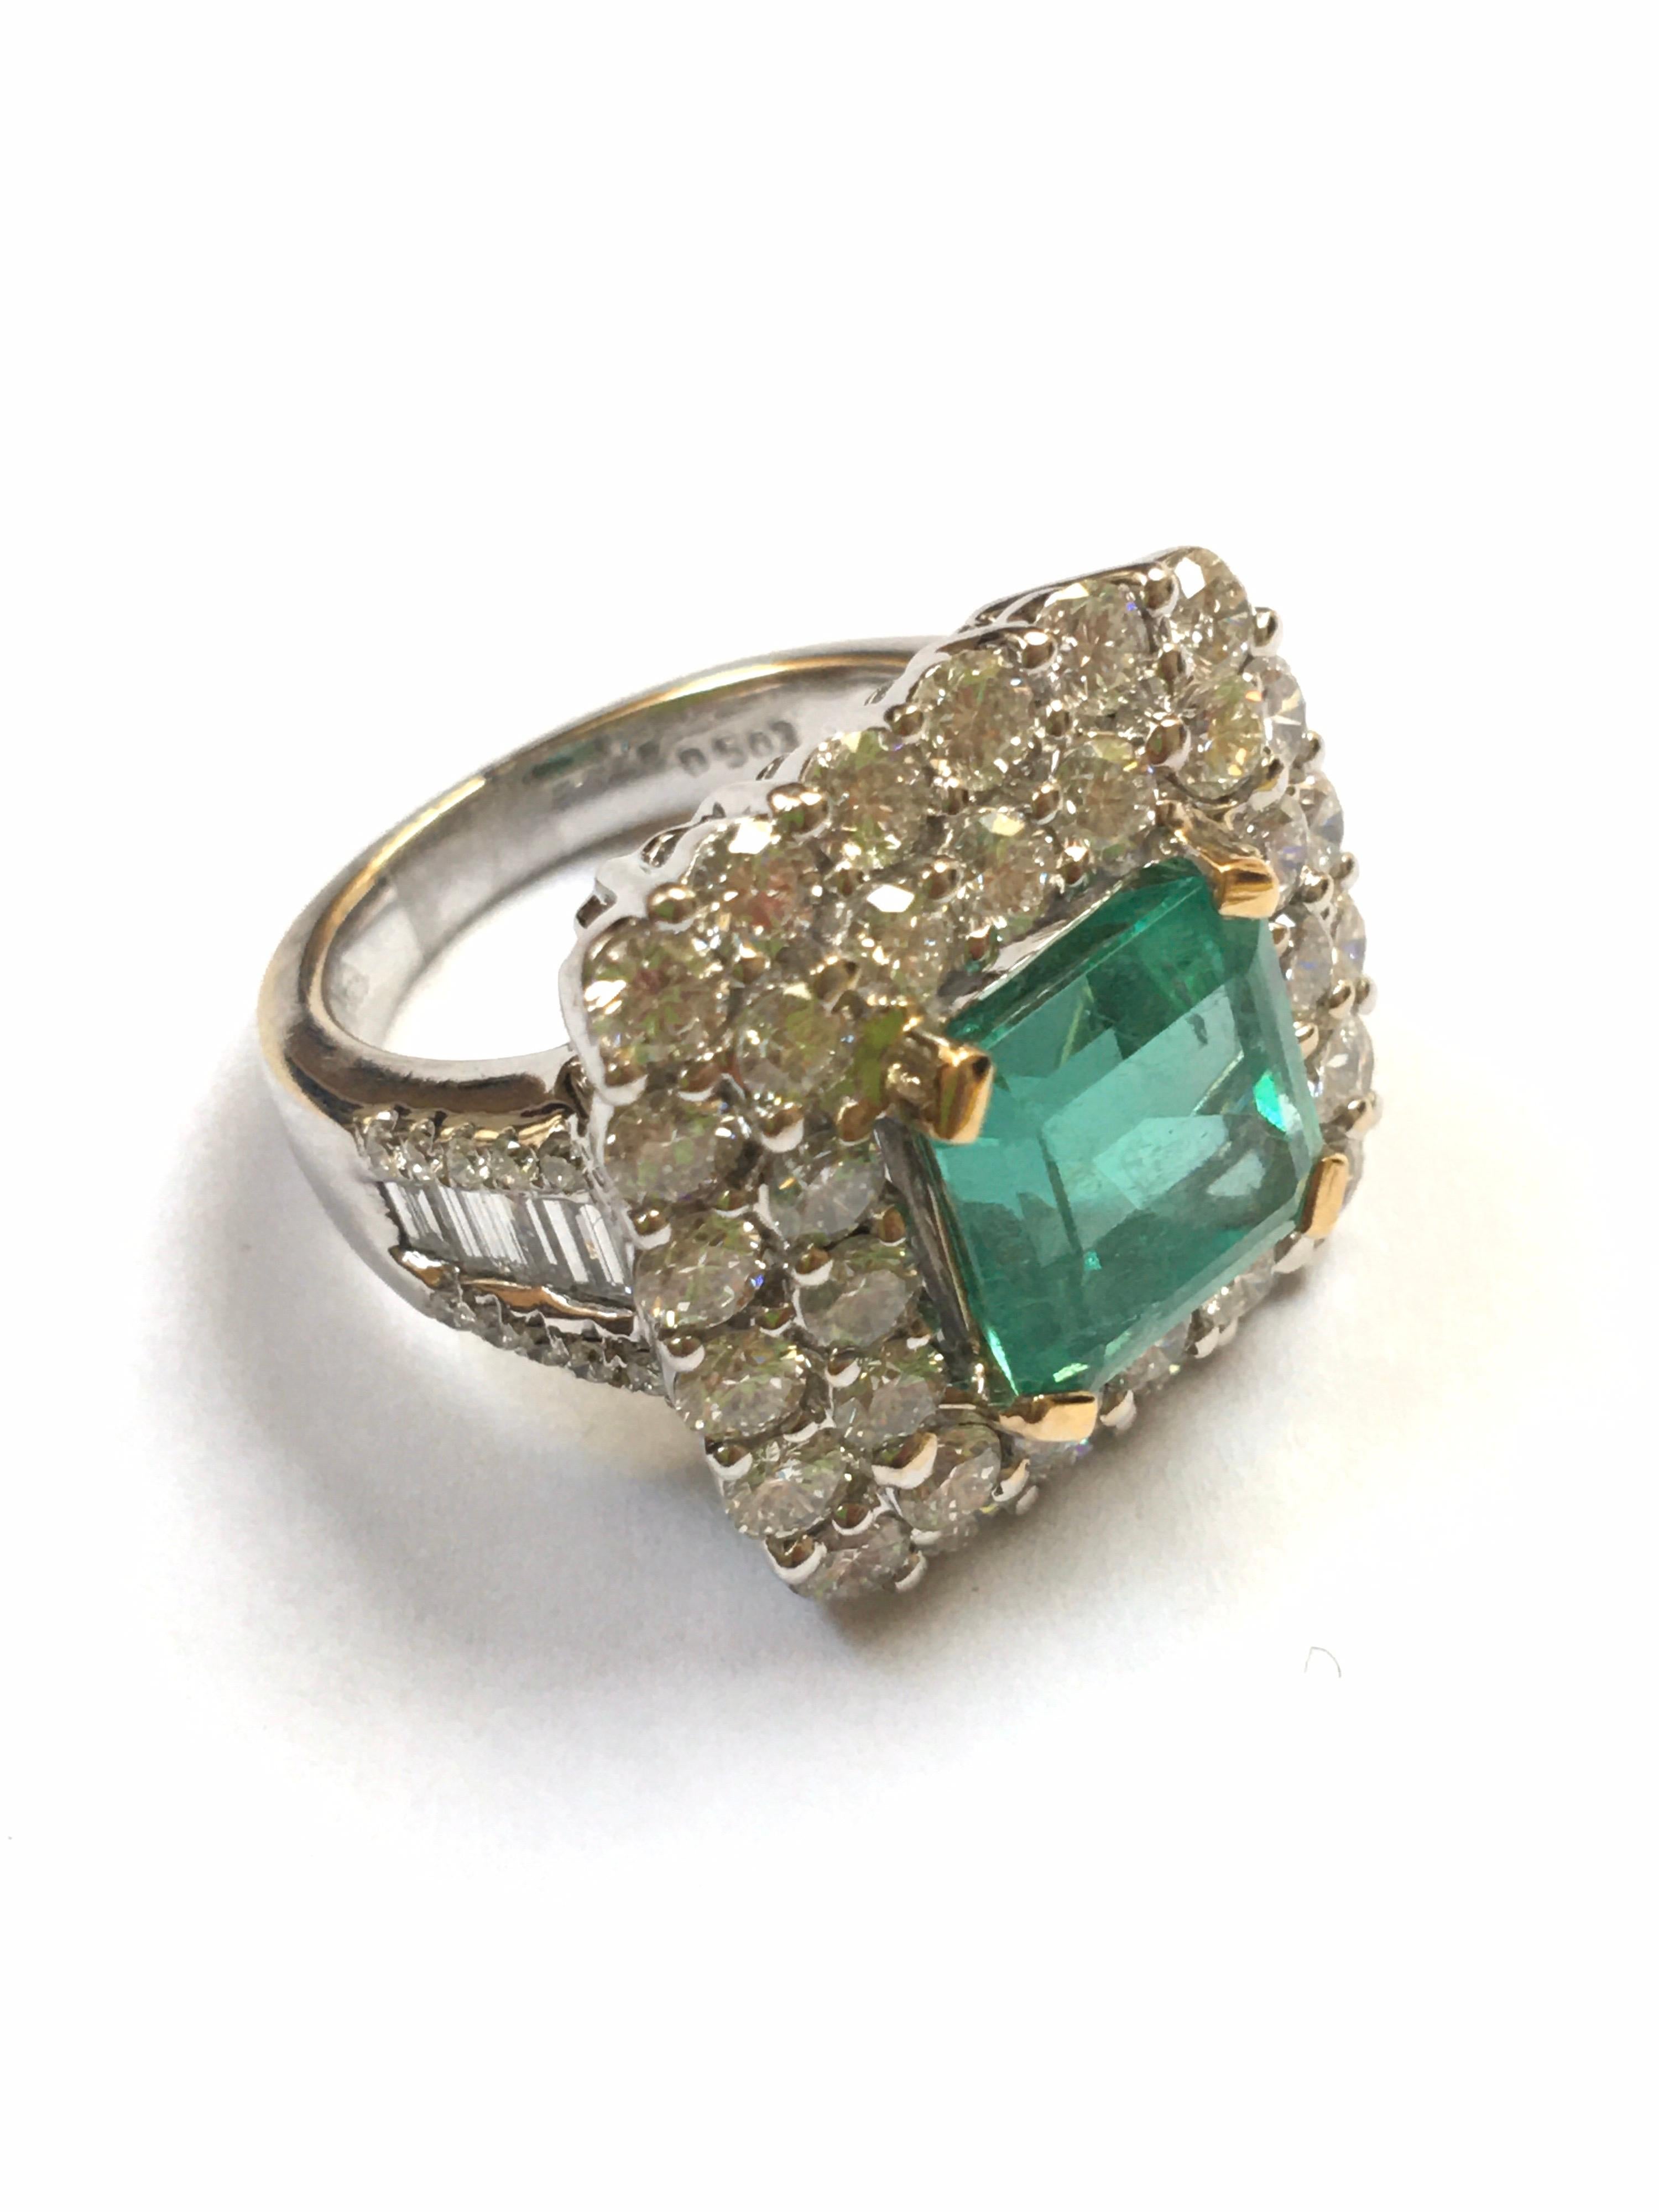 4.88 Ct Colombian Emerald 5.03 Ct Diamond Dress Ring Set in 18 Karat White Gold In New Condition For Sale In London, GB